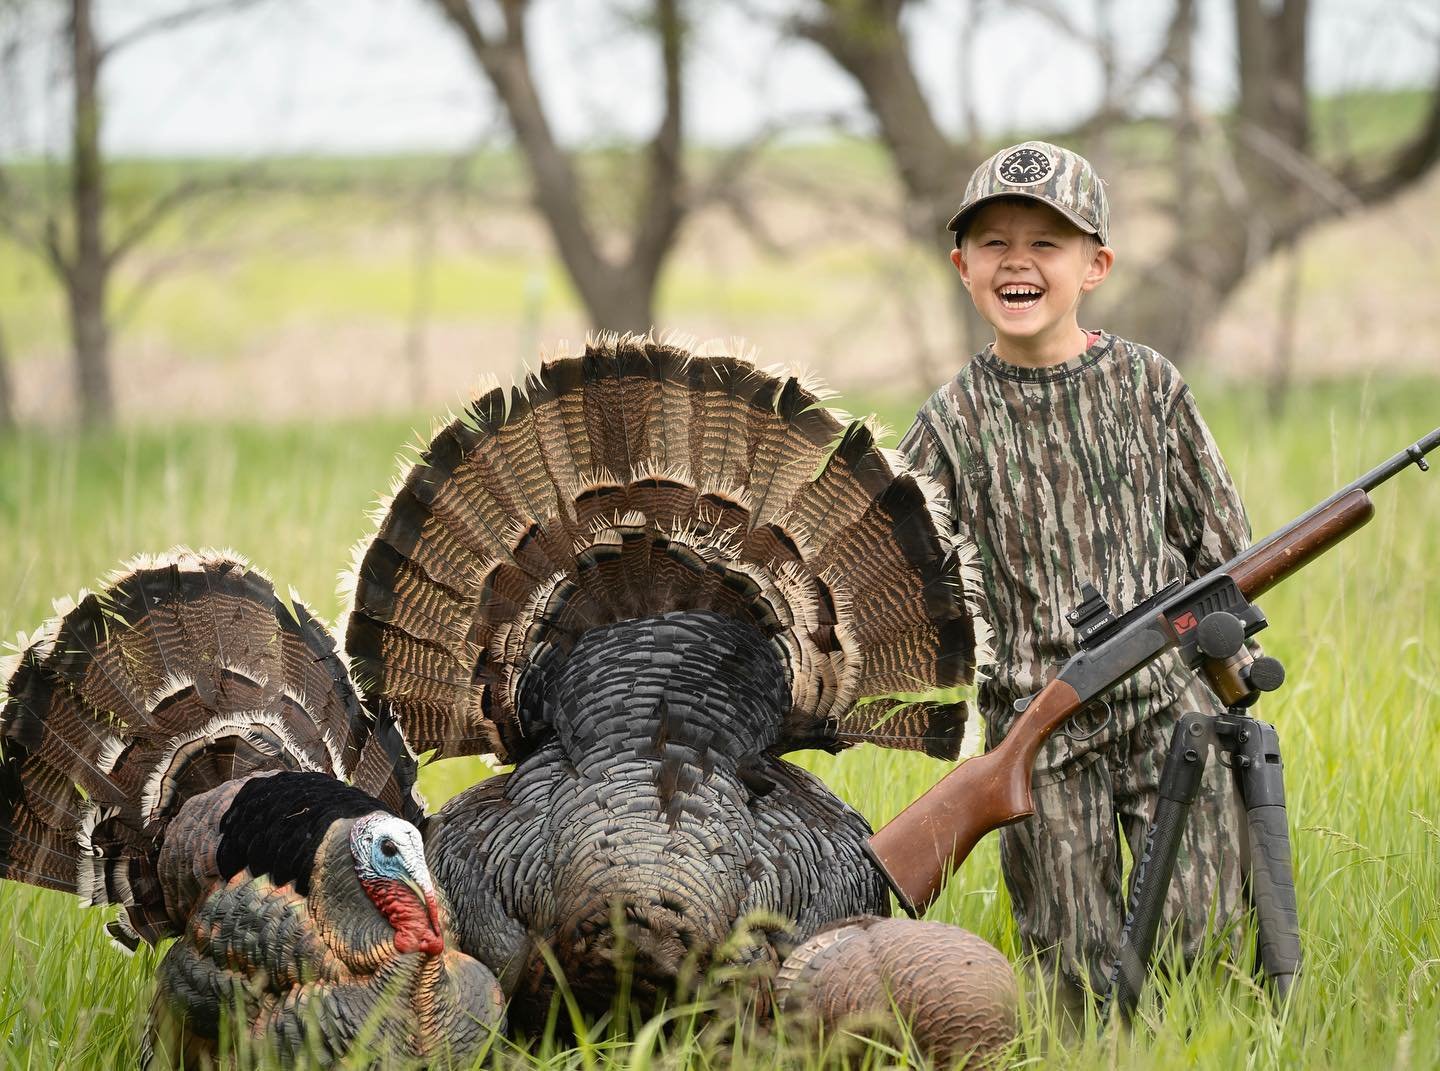 Jax does it again! 🔥

At just 5 years old, Jax made a perfect shot with his  Winchester 410, bringing home his third turkey of his life as he reminded us. He&rsquo;s becoming quite the little hunter and we have so much fun together doing what we lov